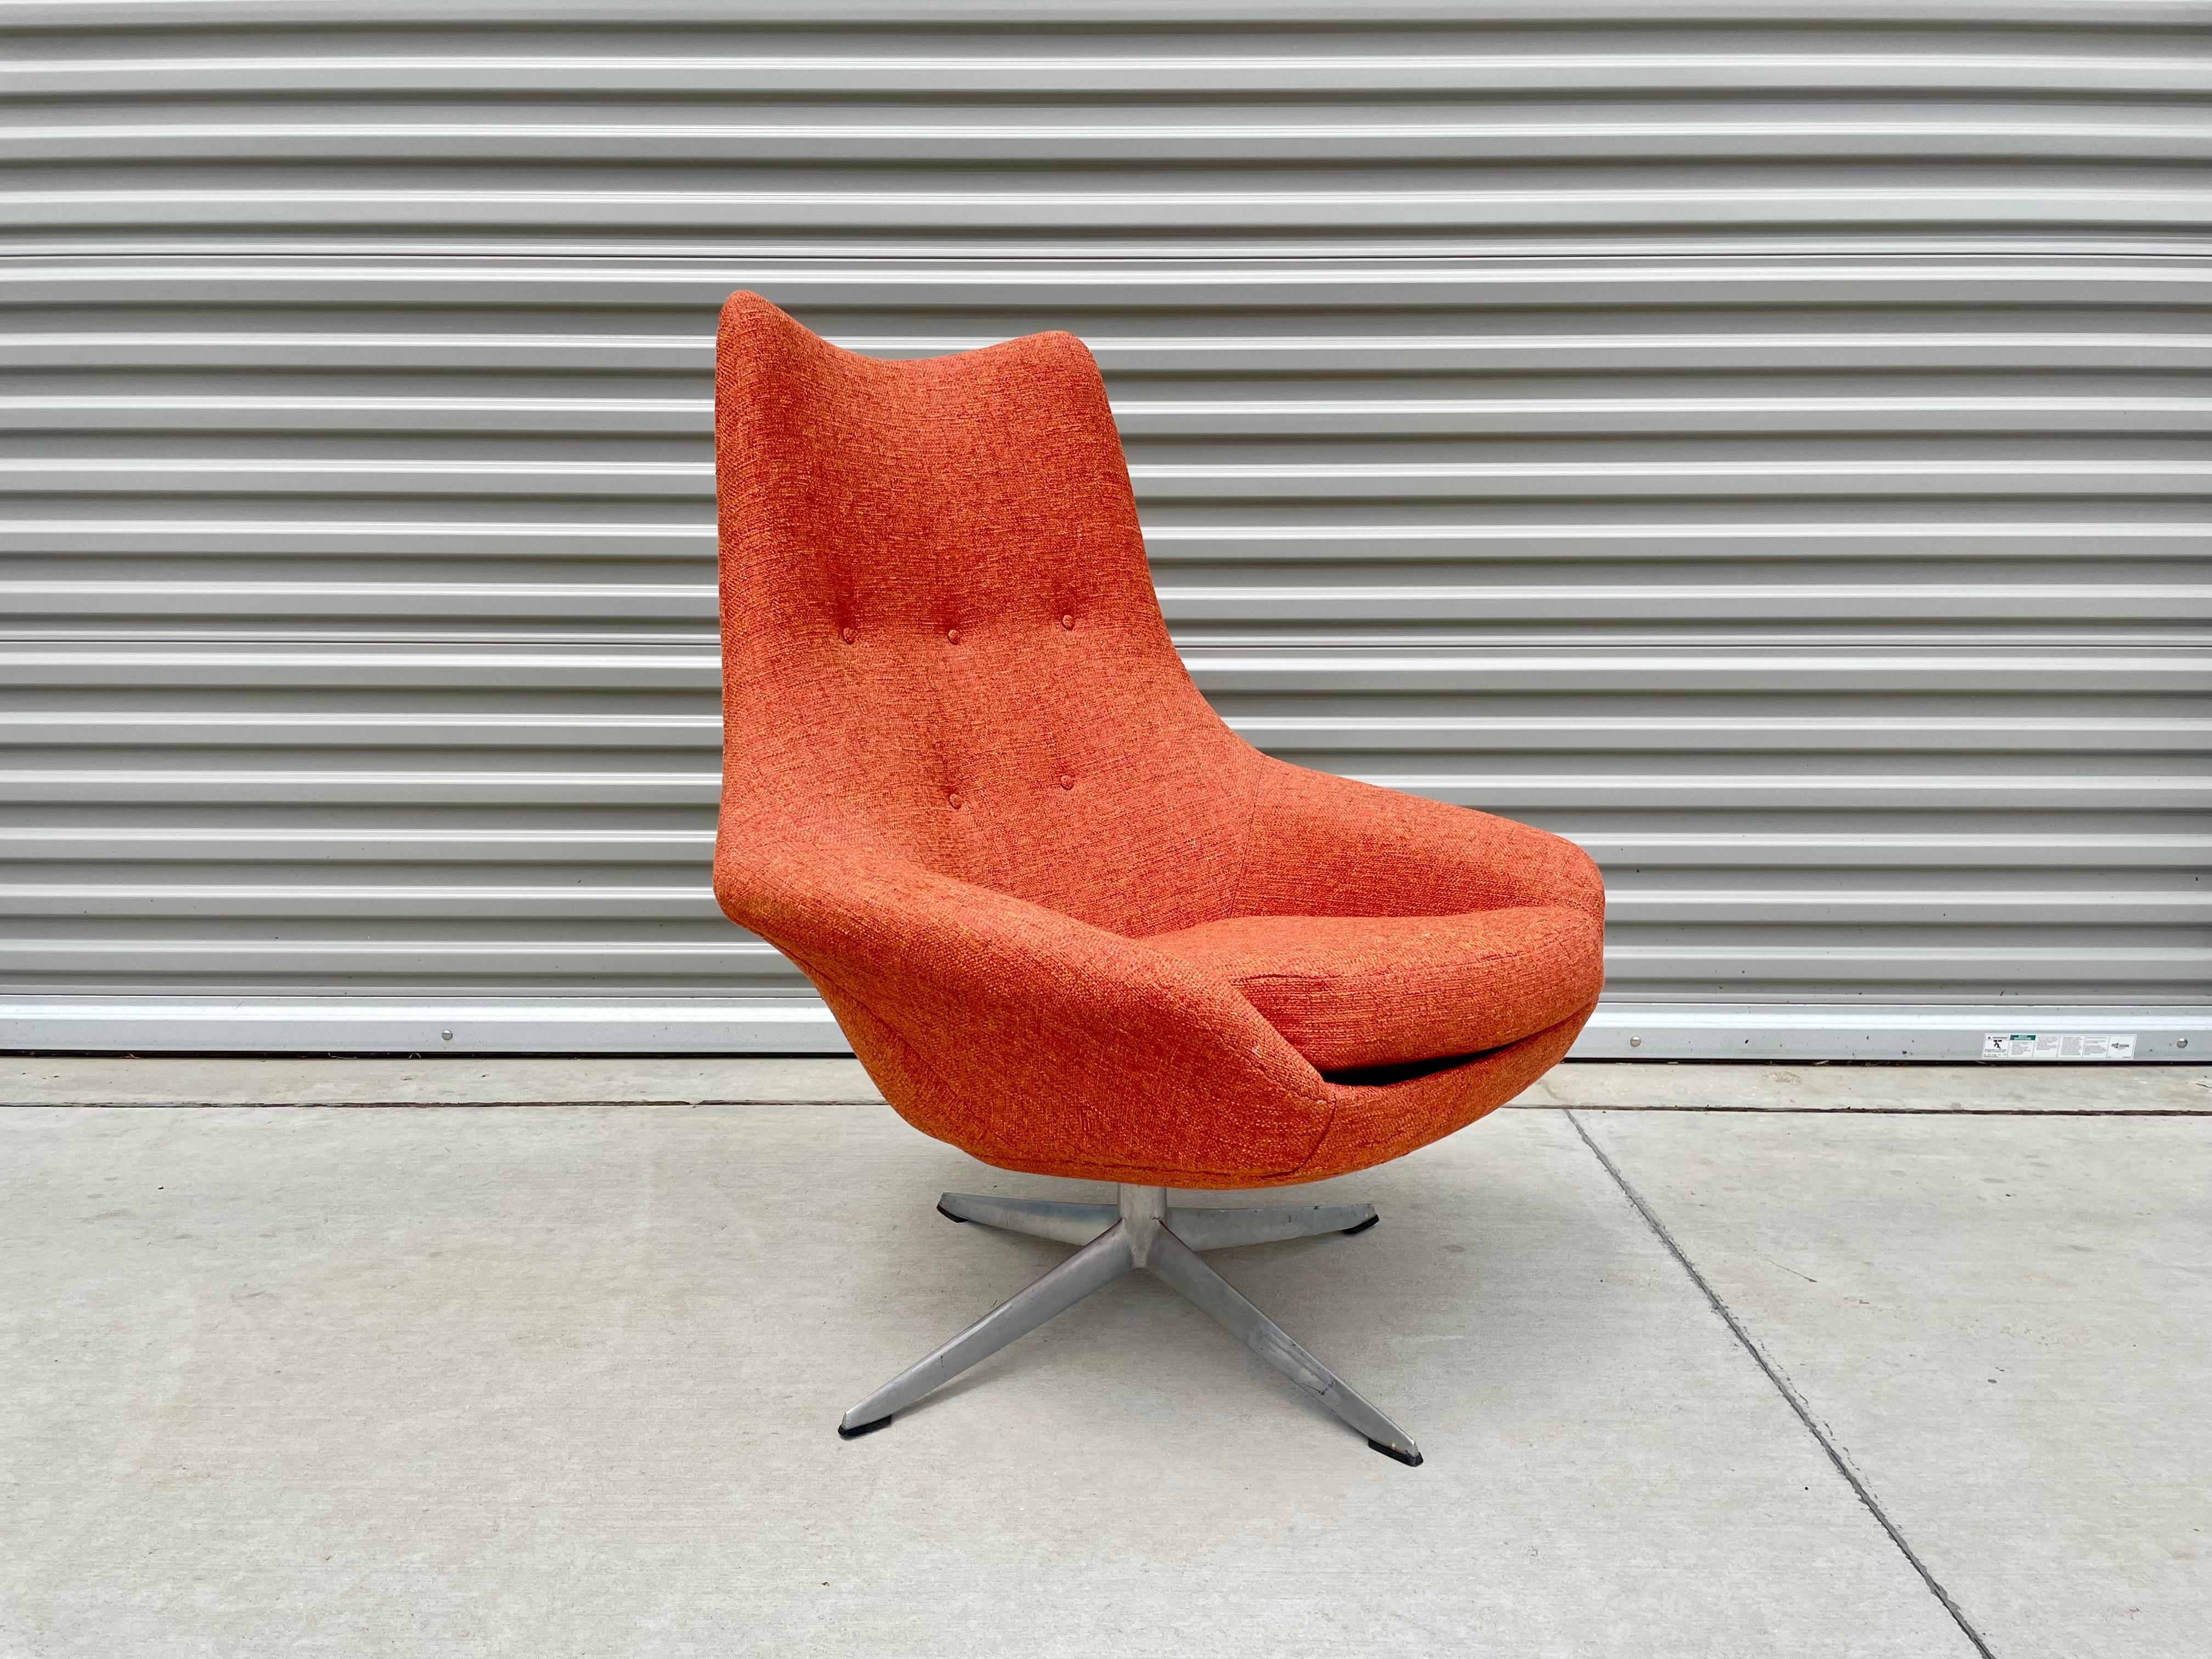 Mid-century swivel egg chair by H.W. Klein for Brahmin Møbelfabrik manufactured in Denmark, circa 1970s. This beautiful egg chair features red upholstery in good shape since it was previously reupholstered by the owner at one point. The chair